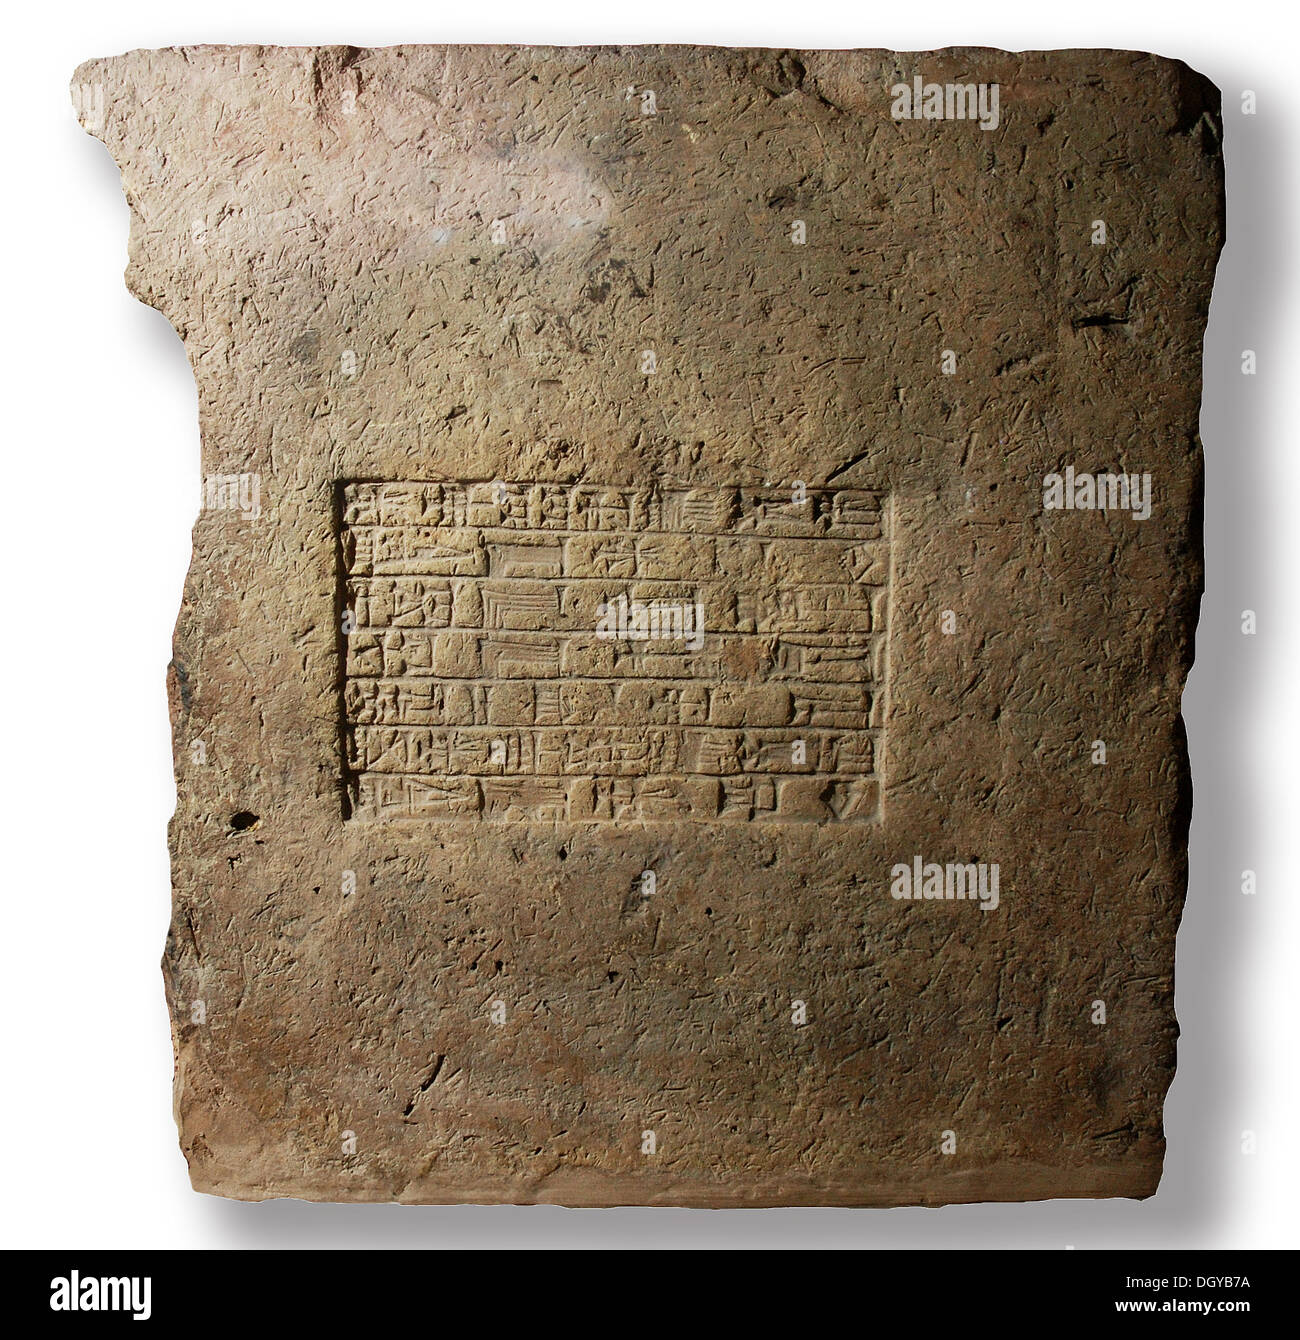 5592. Clay brick inscribed with the name of king Nebuchadnezzar II, King of Babylon dating c. 604-561 BC Stock Photo